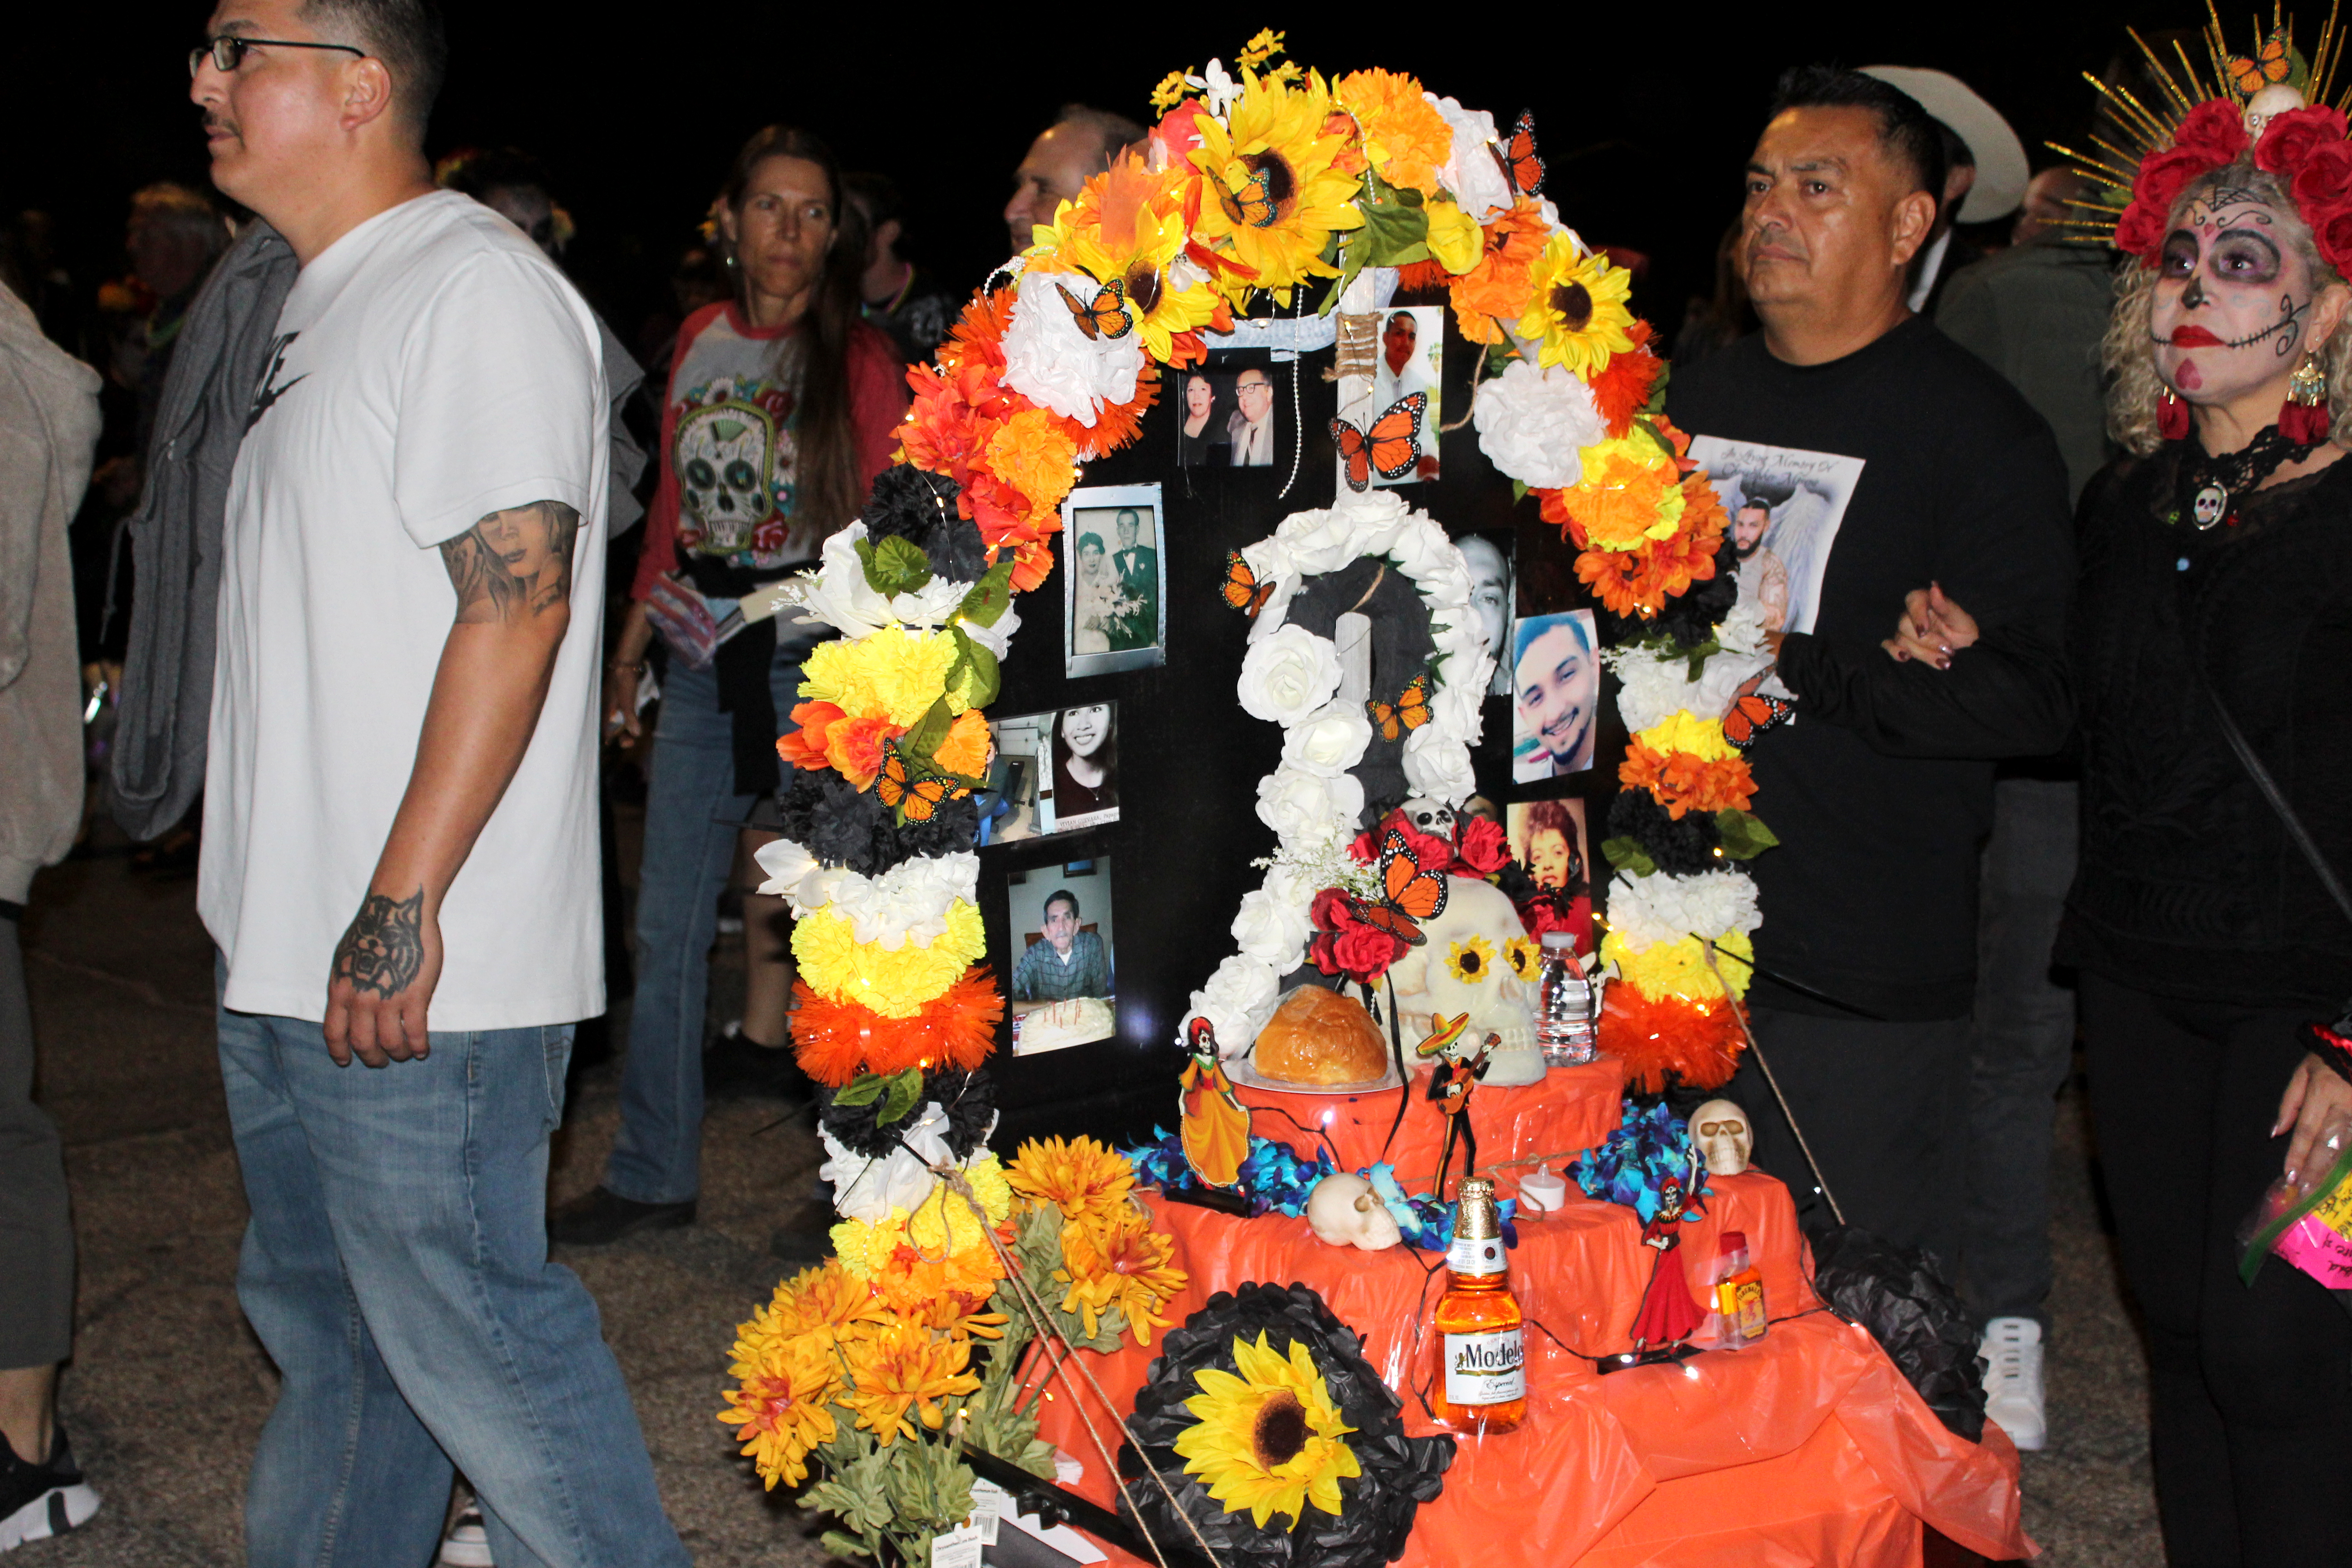 Ofrendas at the 33rd annual All Souls Procession